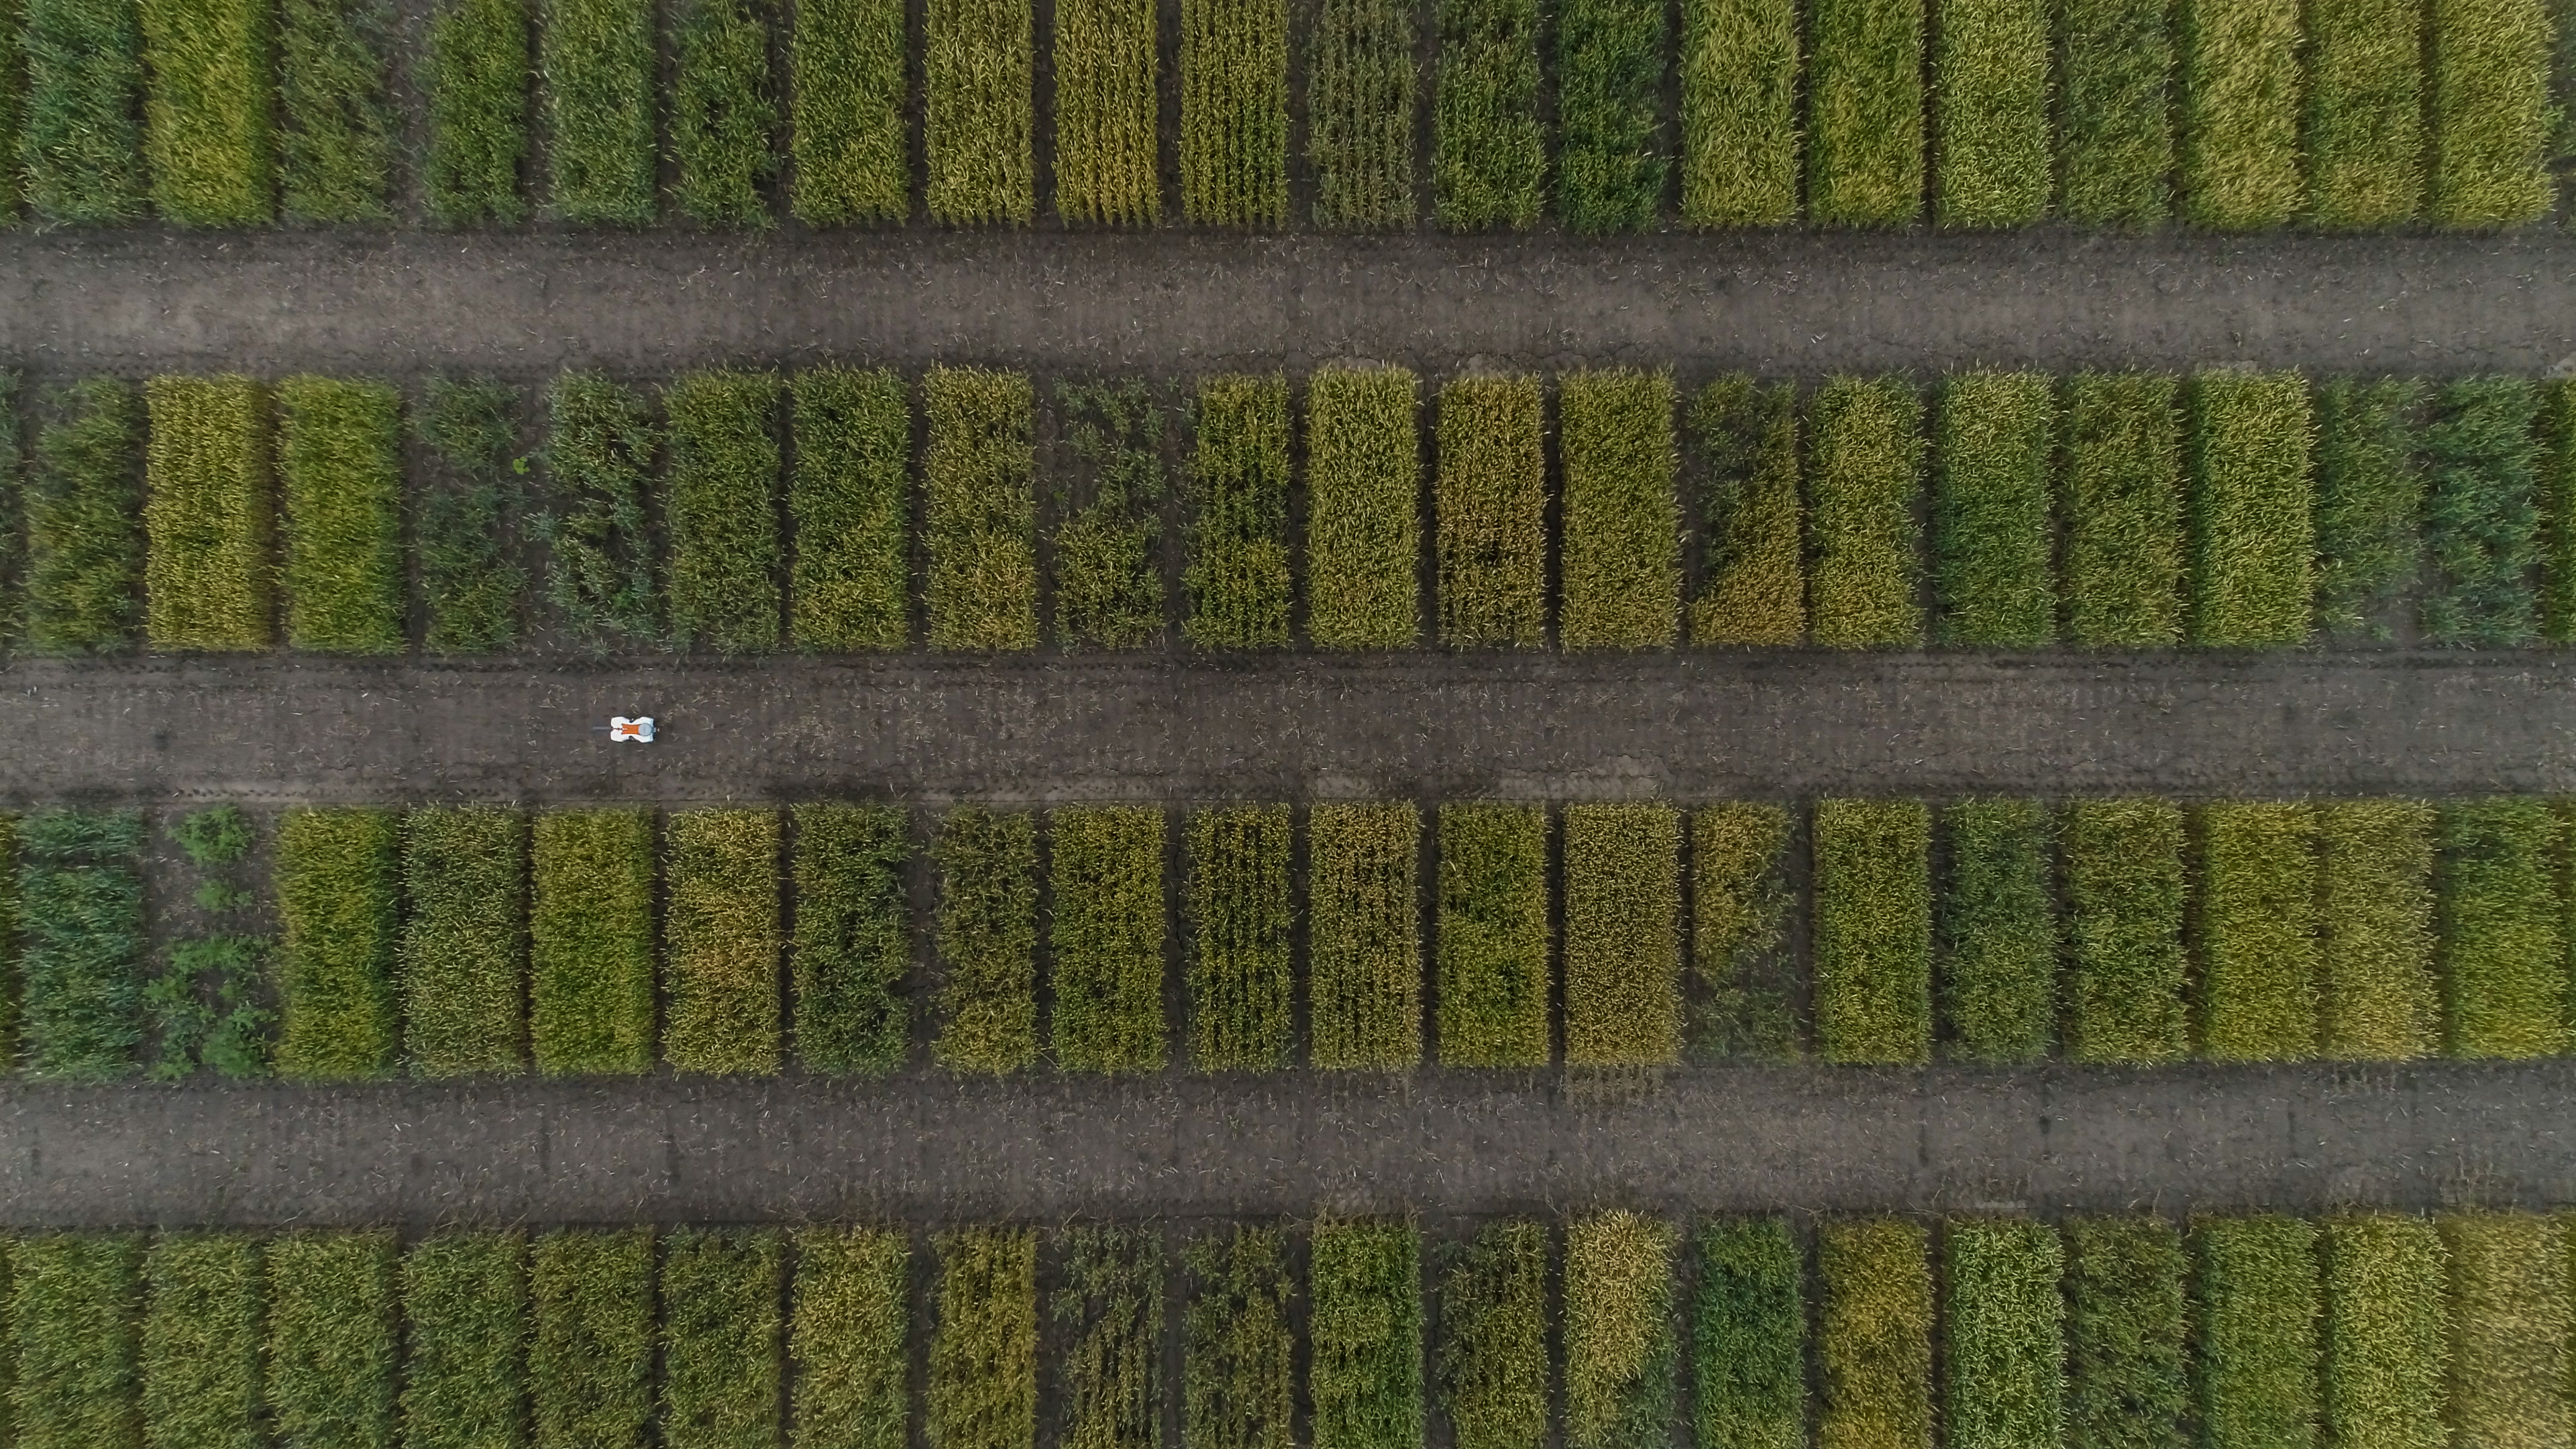 The TerraSentia robot of the agricultural start-up EarthSense drives through the parcels of a wheat trial field (aerial photograph).